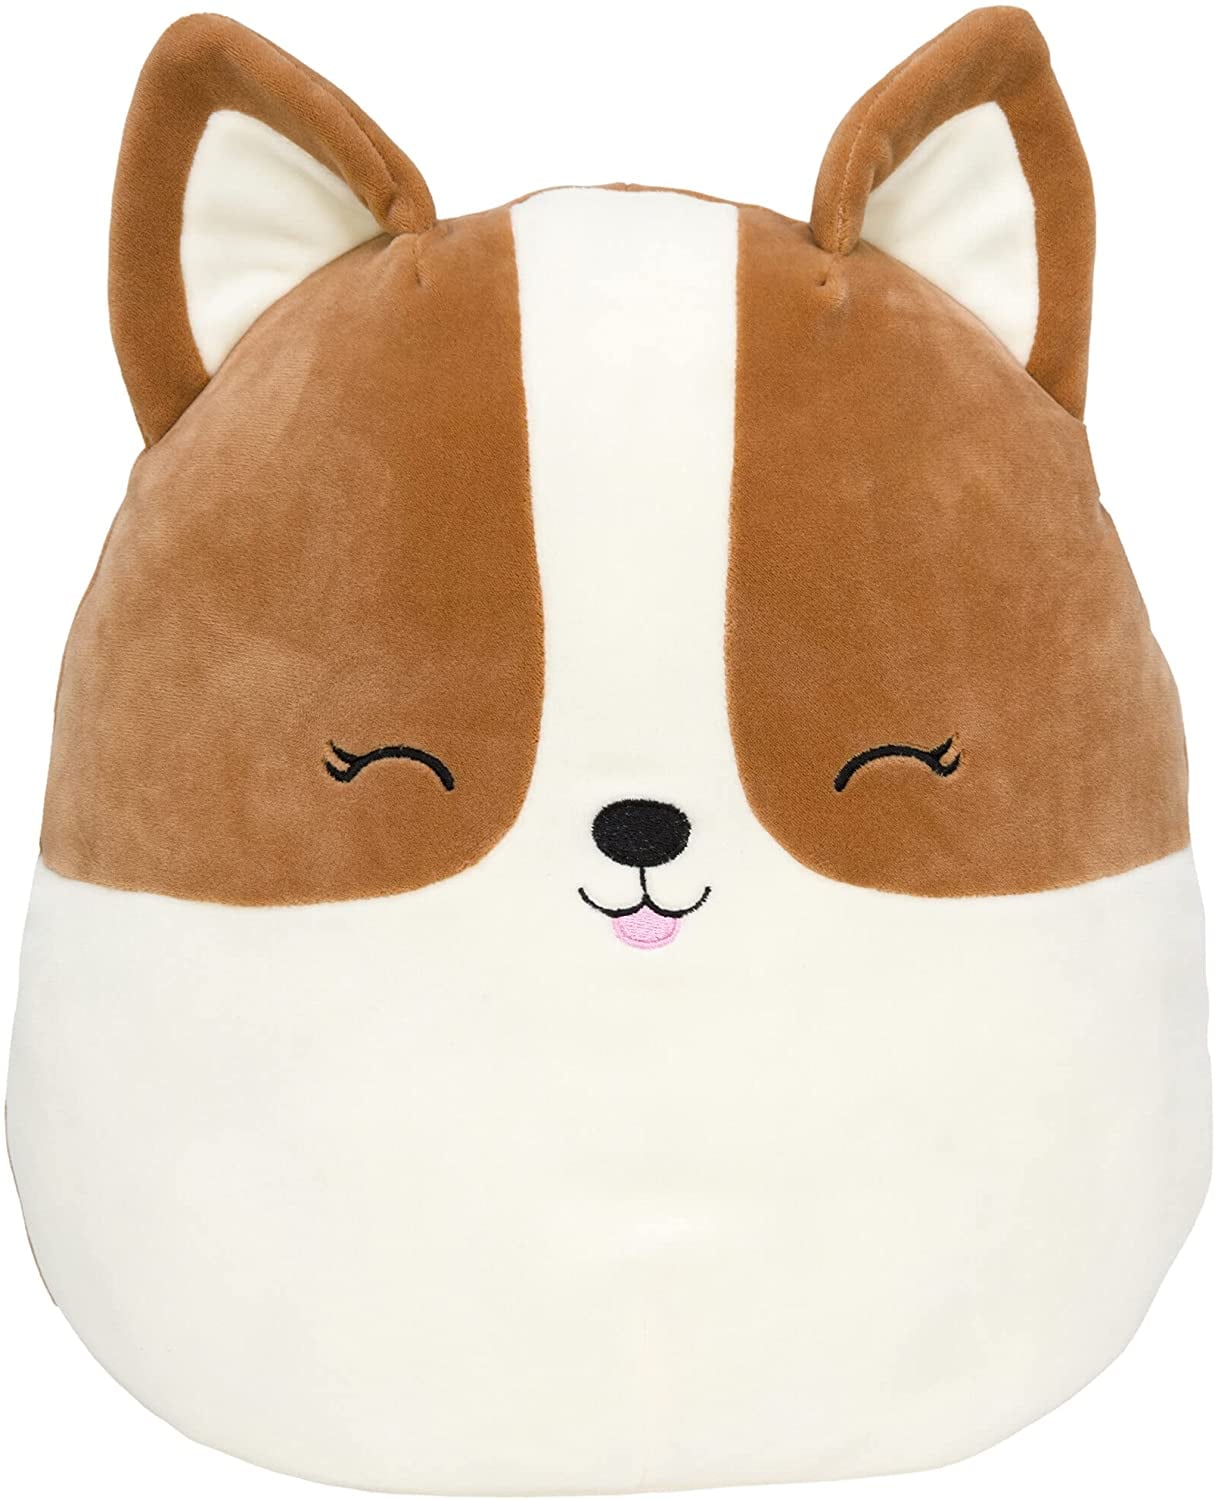 18 of the best, cutest Squishmallows in 2023